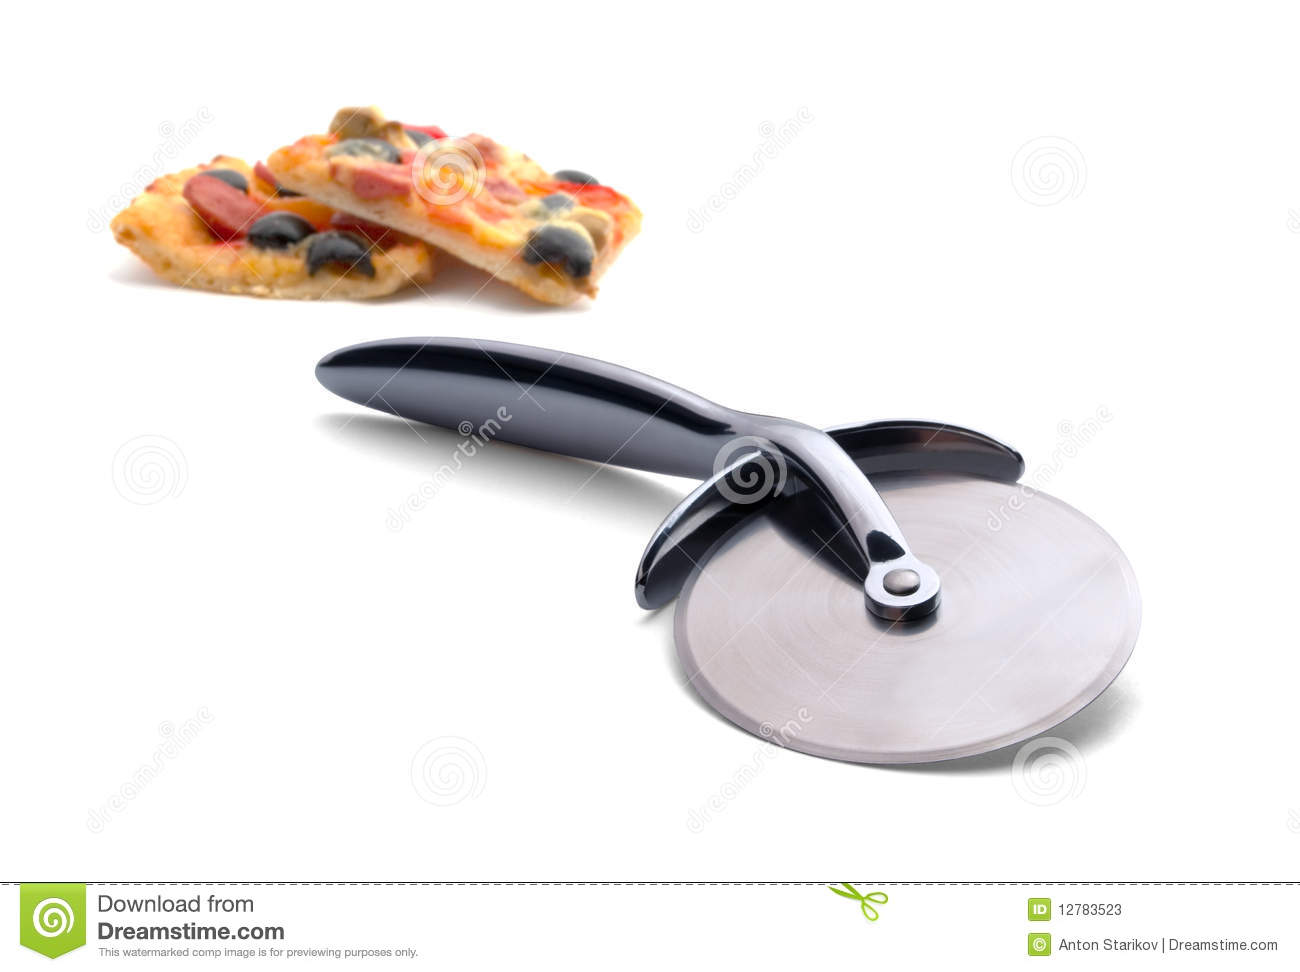 Steel Pizza Cutter And Two Pieces Of Pizza Isolatedon White